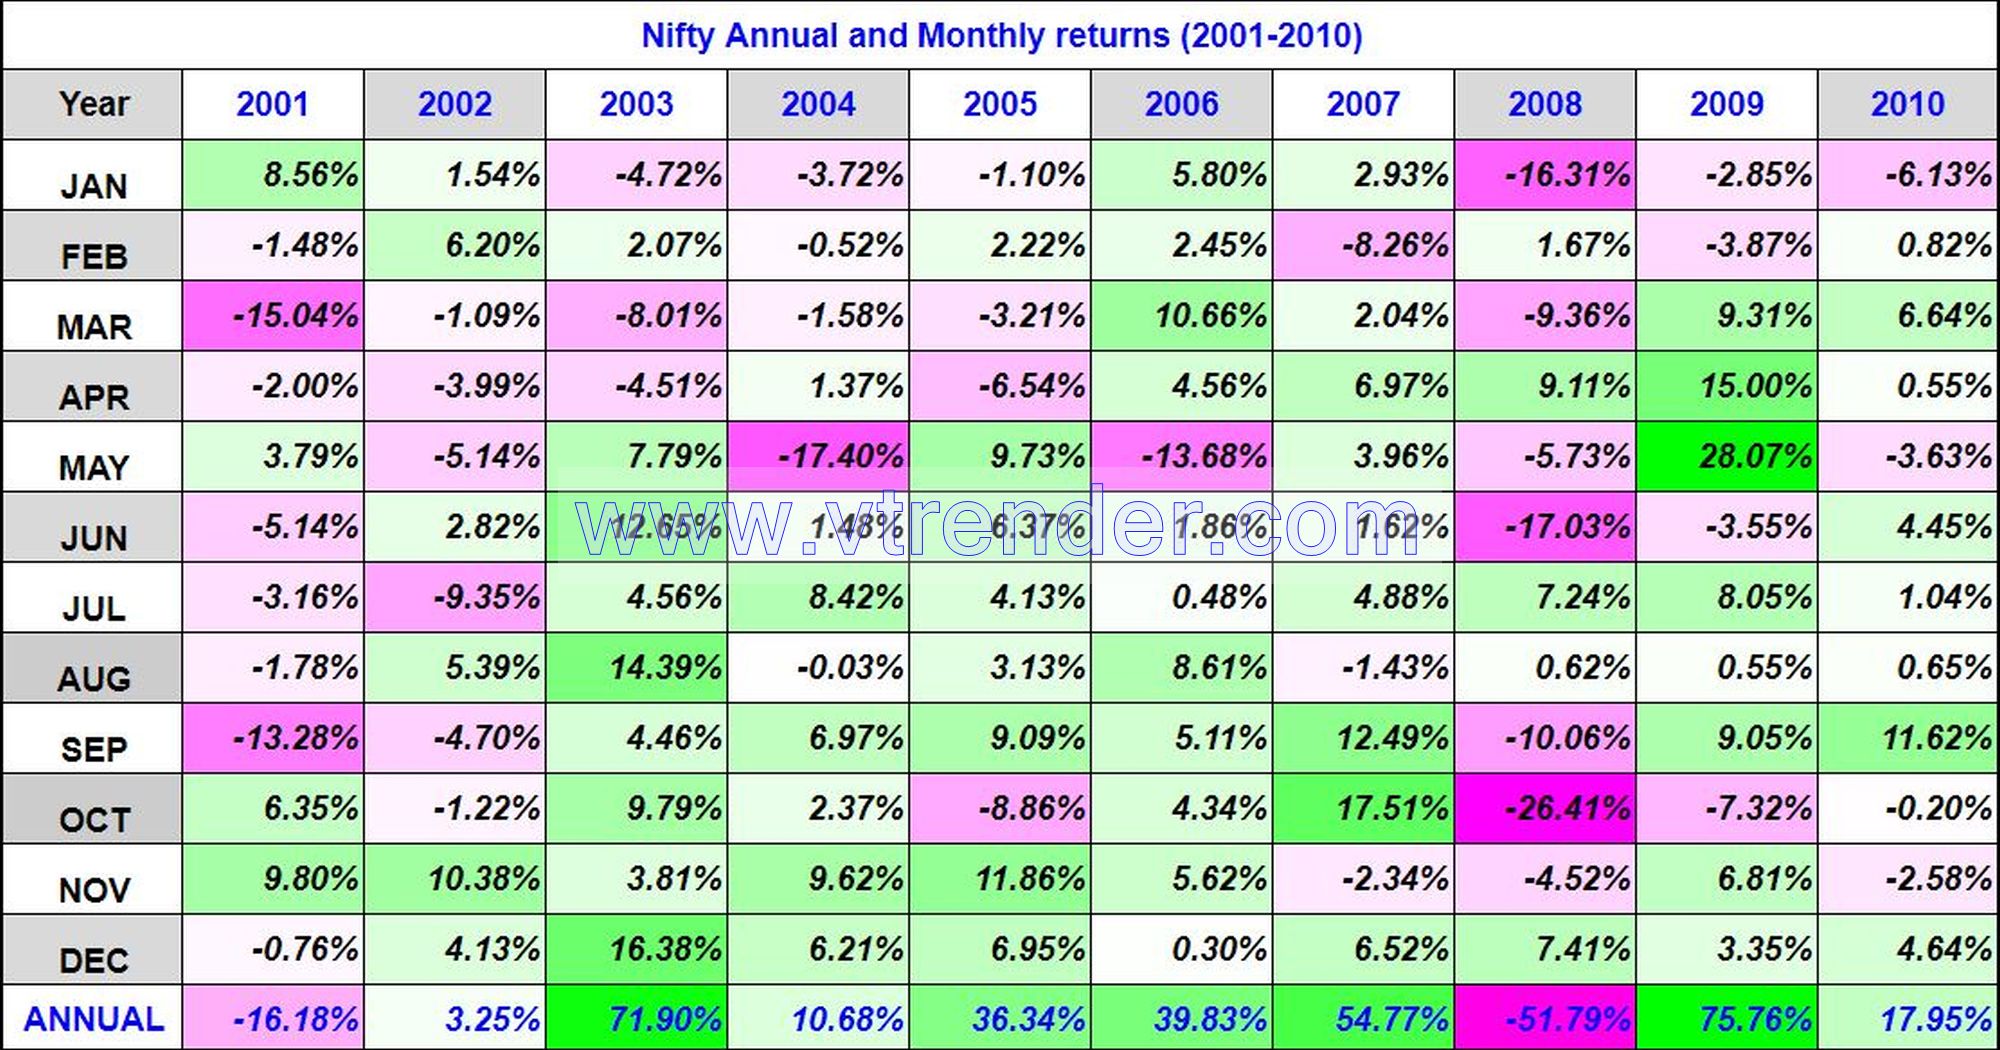 Niftyreturns2001 2010 Nifty 50 Monthly And Annual Returns (1991-2023) Updated 6Th Apr 2023 Annual, Monthly, Nifty Returns